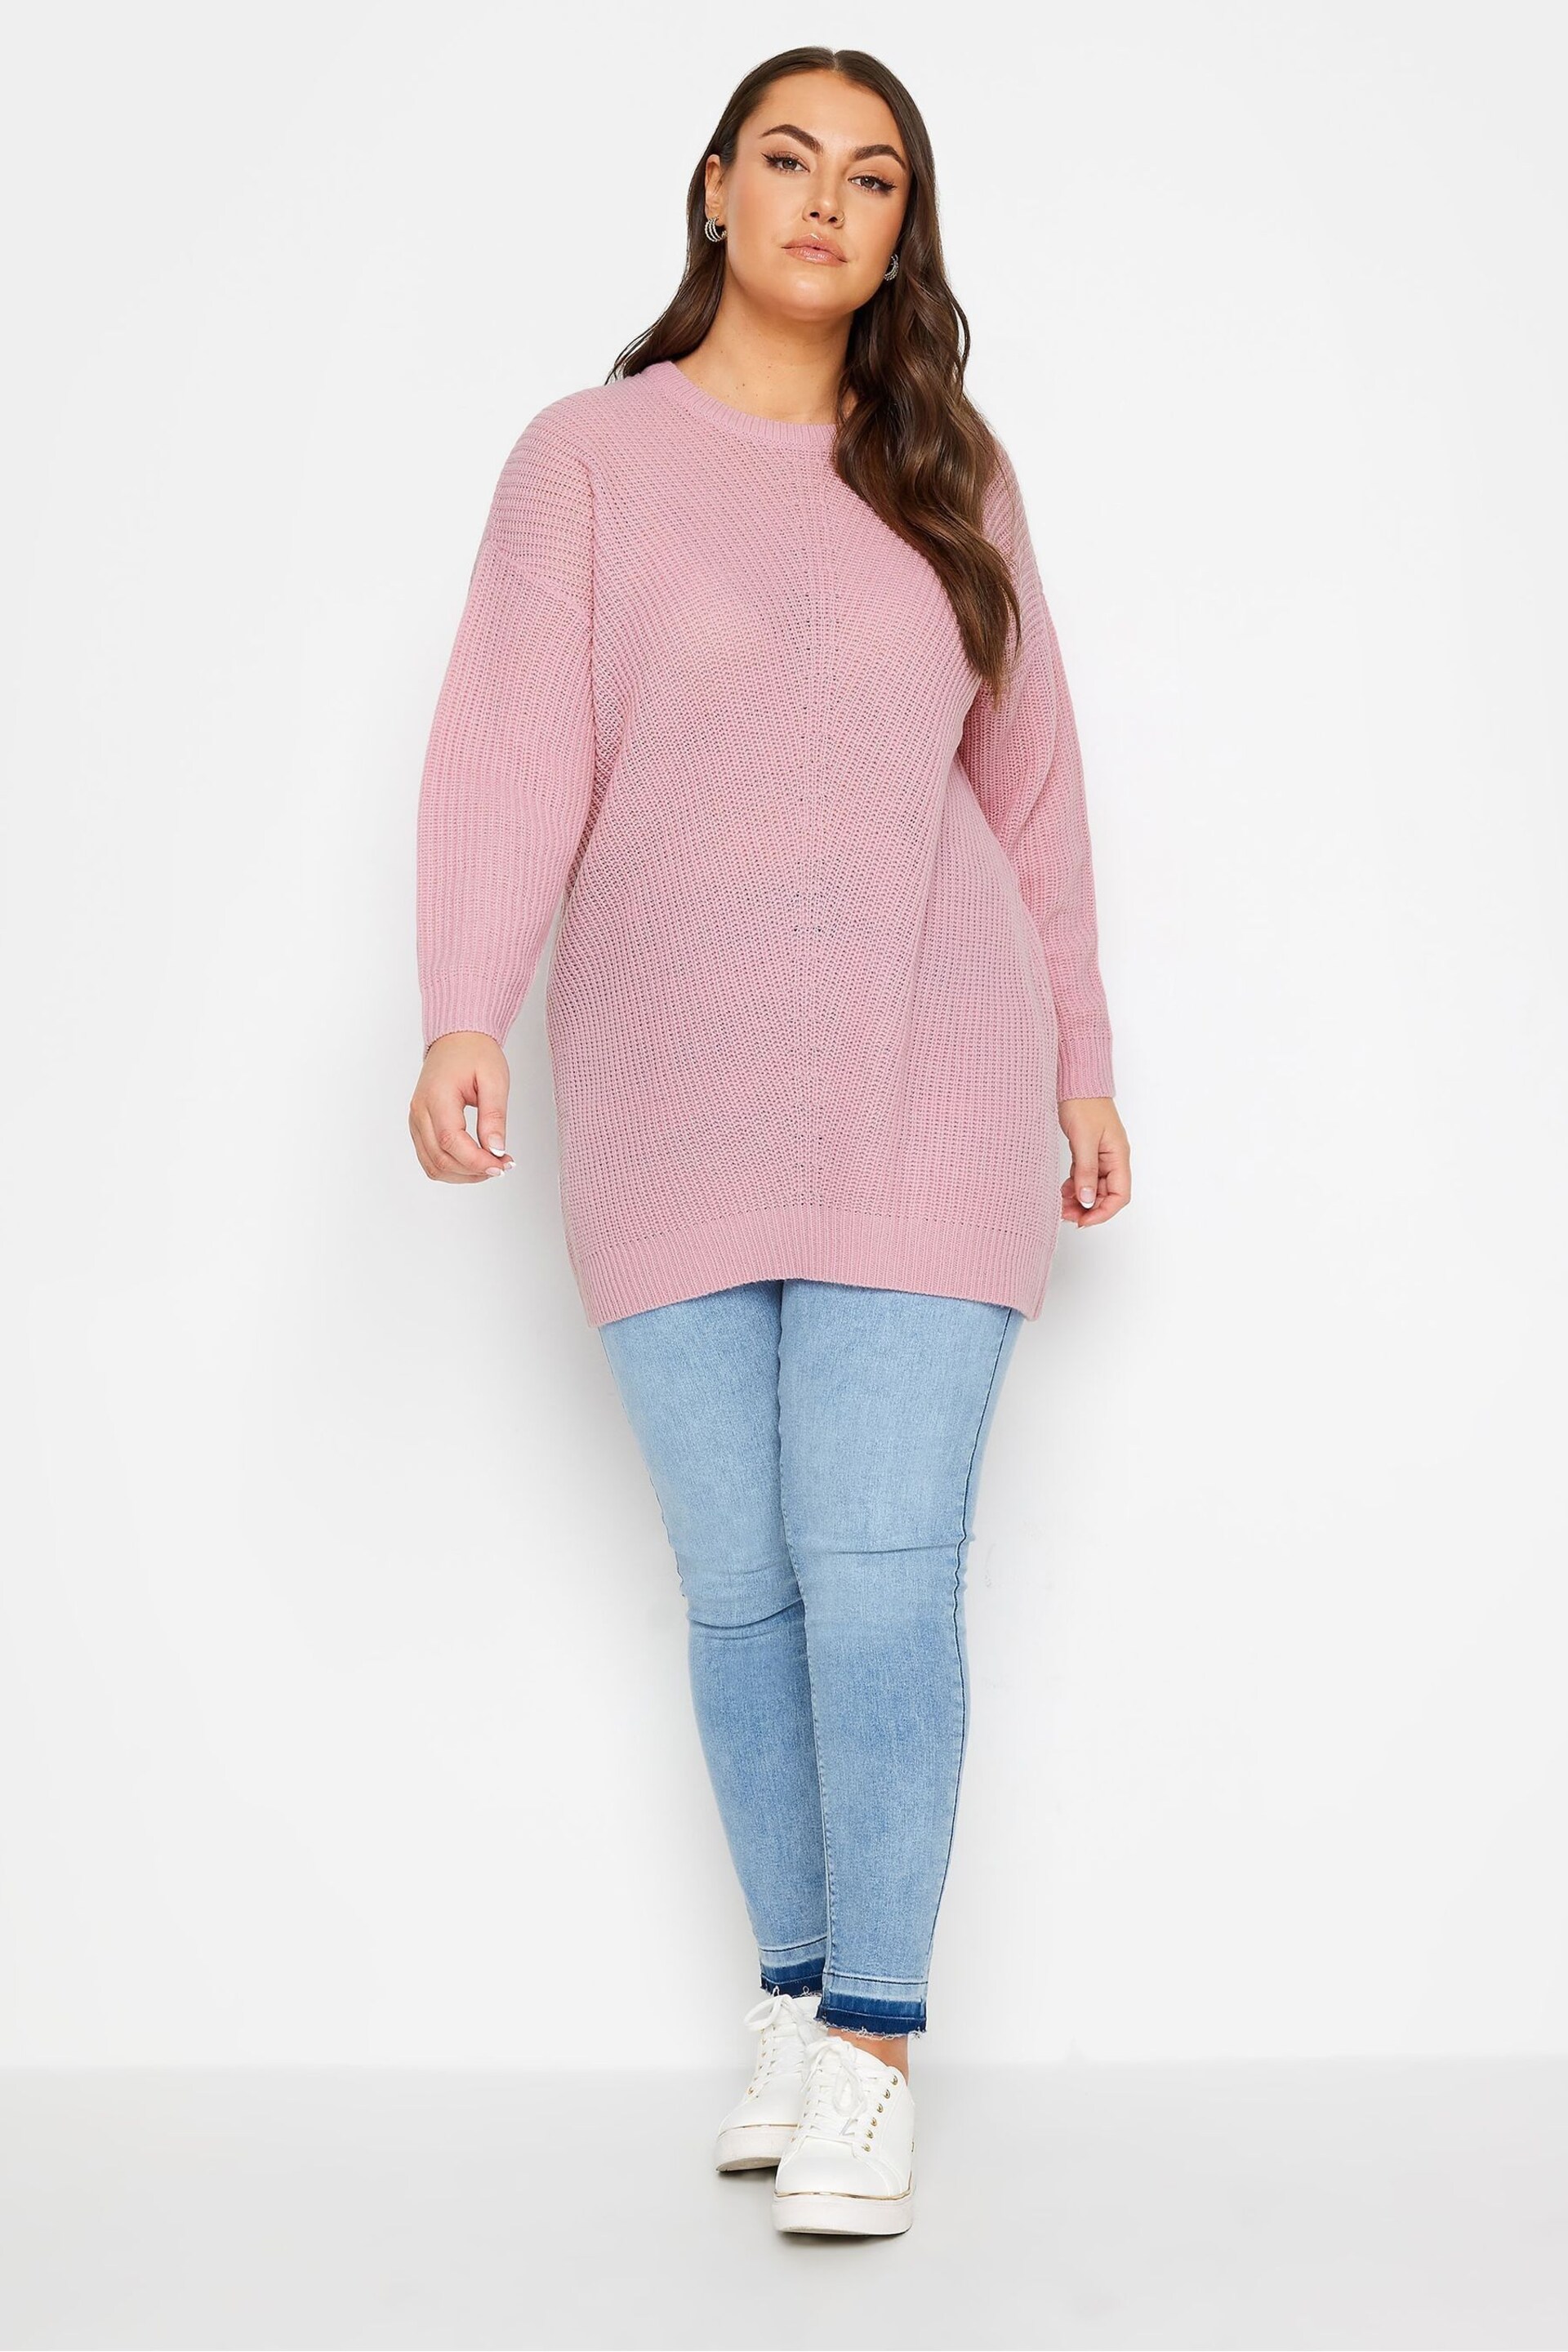 Yours Curve Pink Essential Jumper - Image 2 of 4